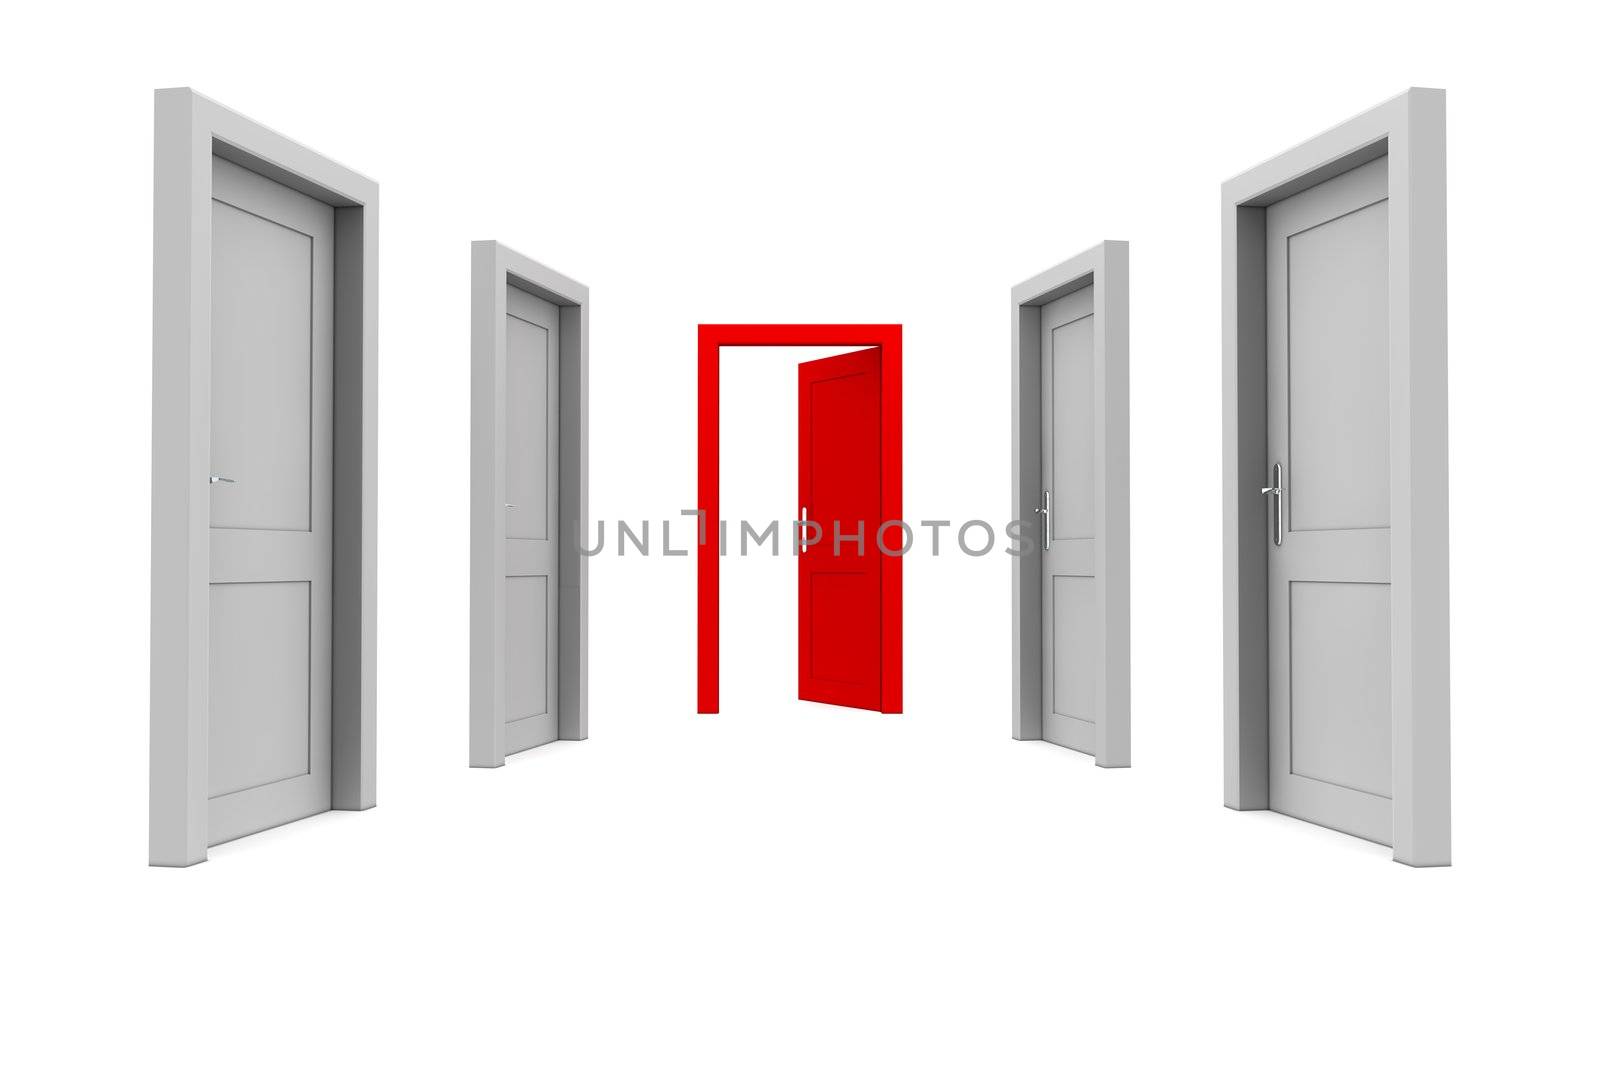 Take the Red Door by PixBox